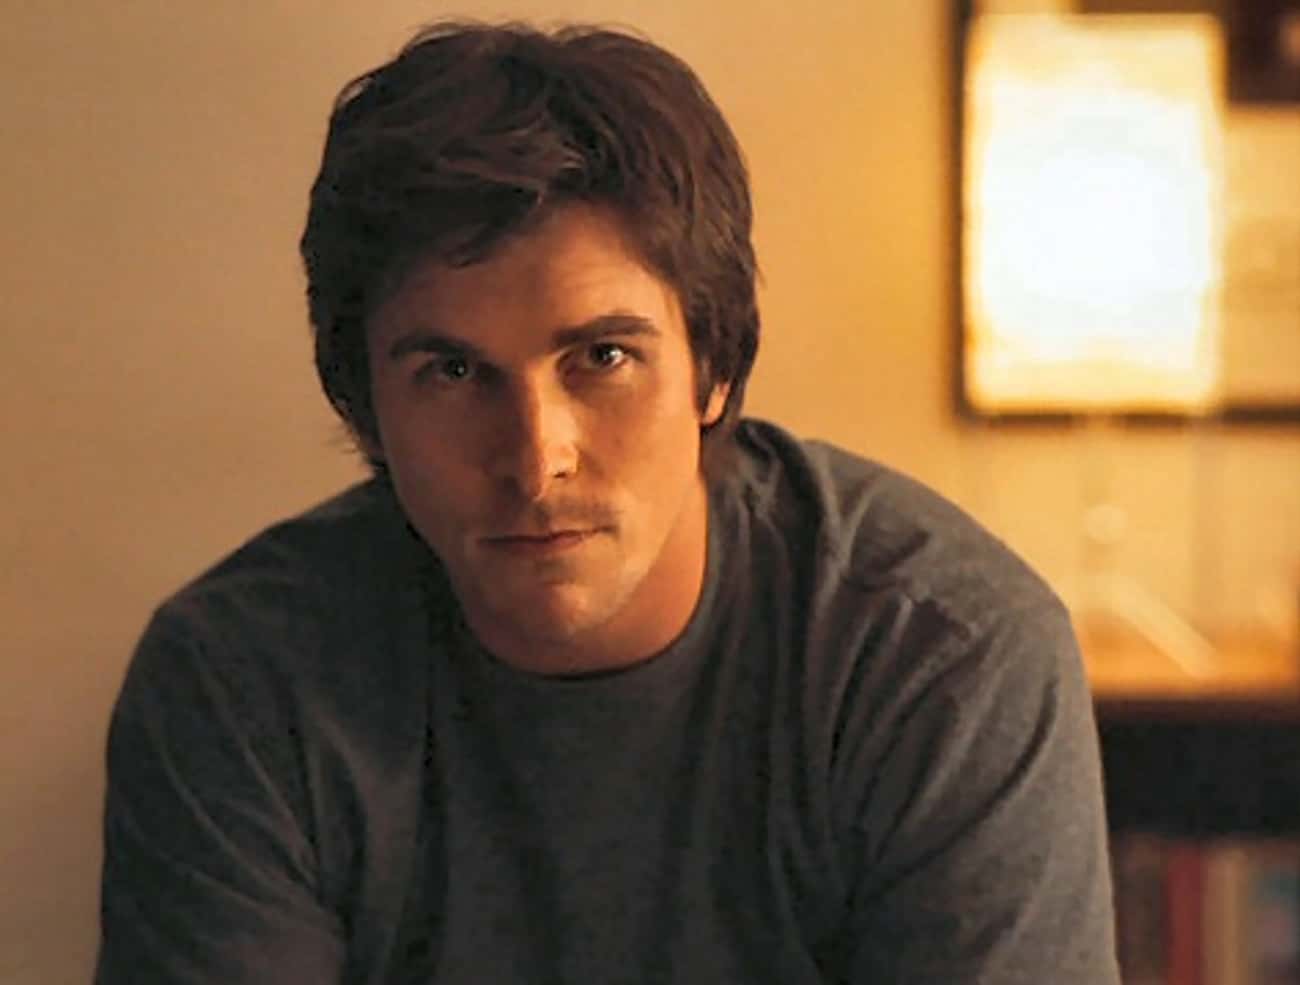 Young Christian Bale in Gray Shirt